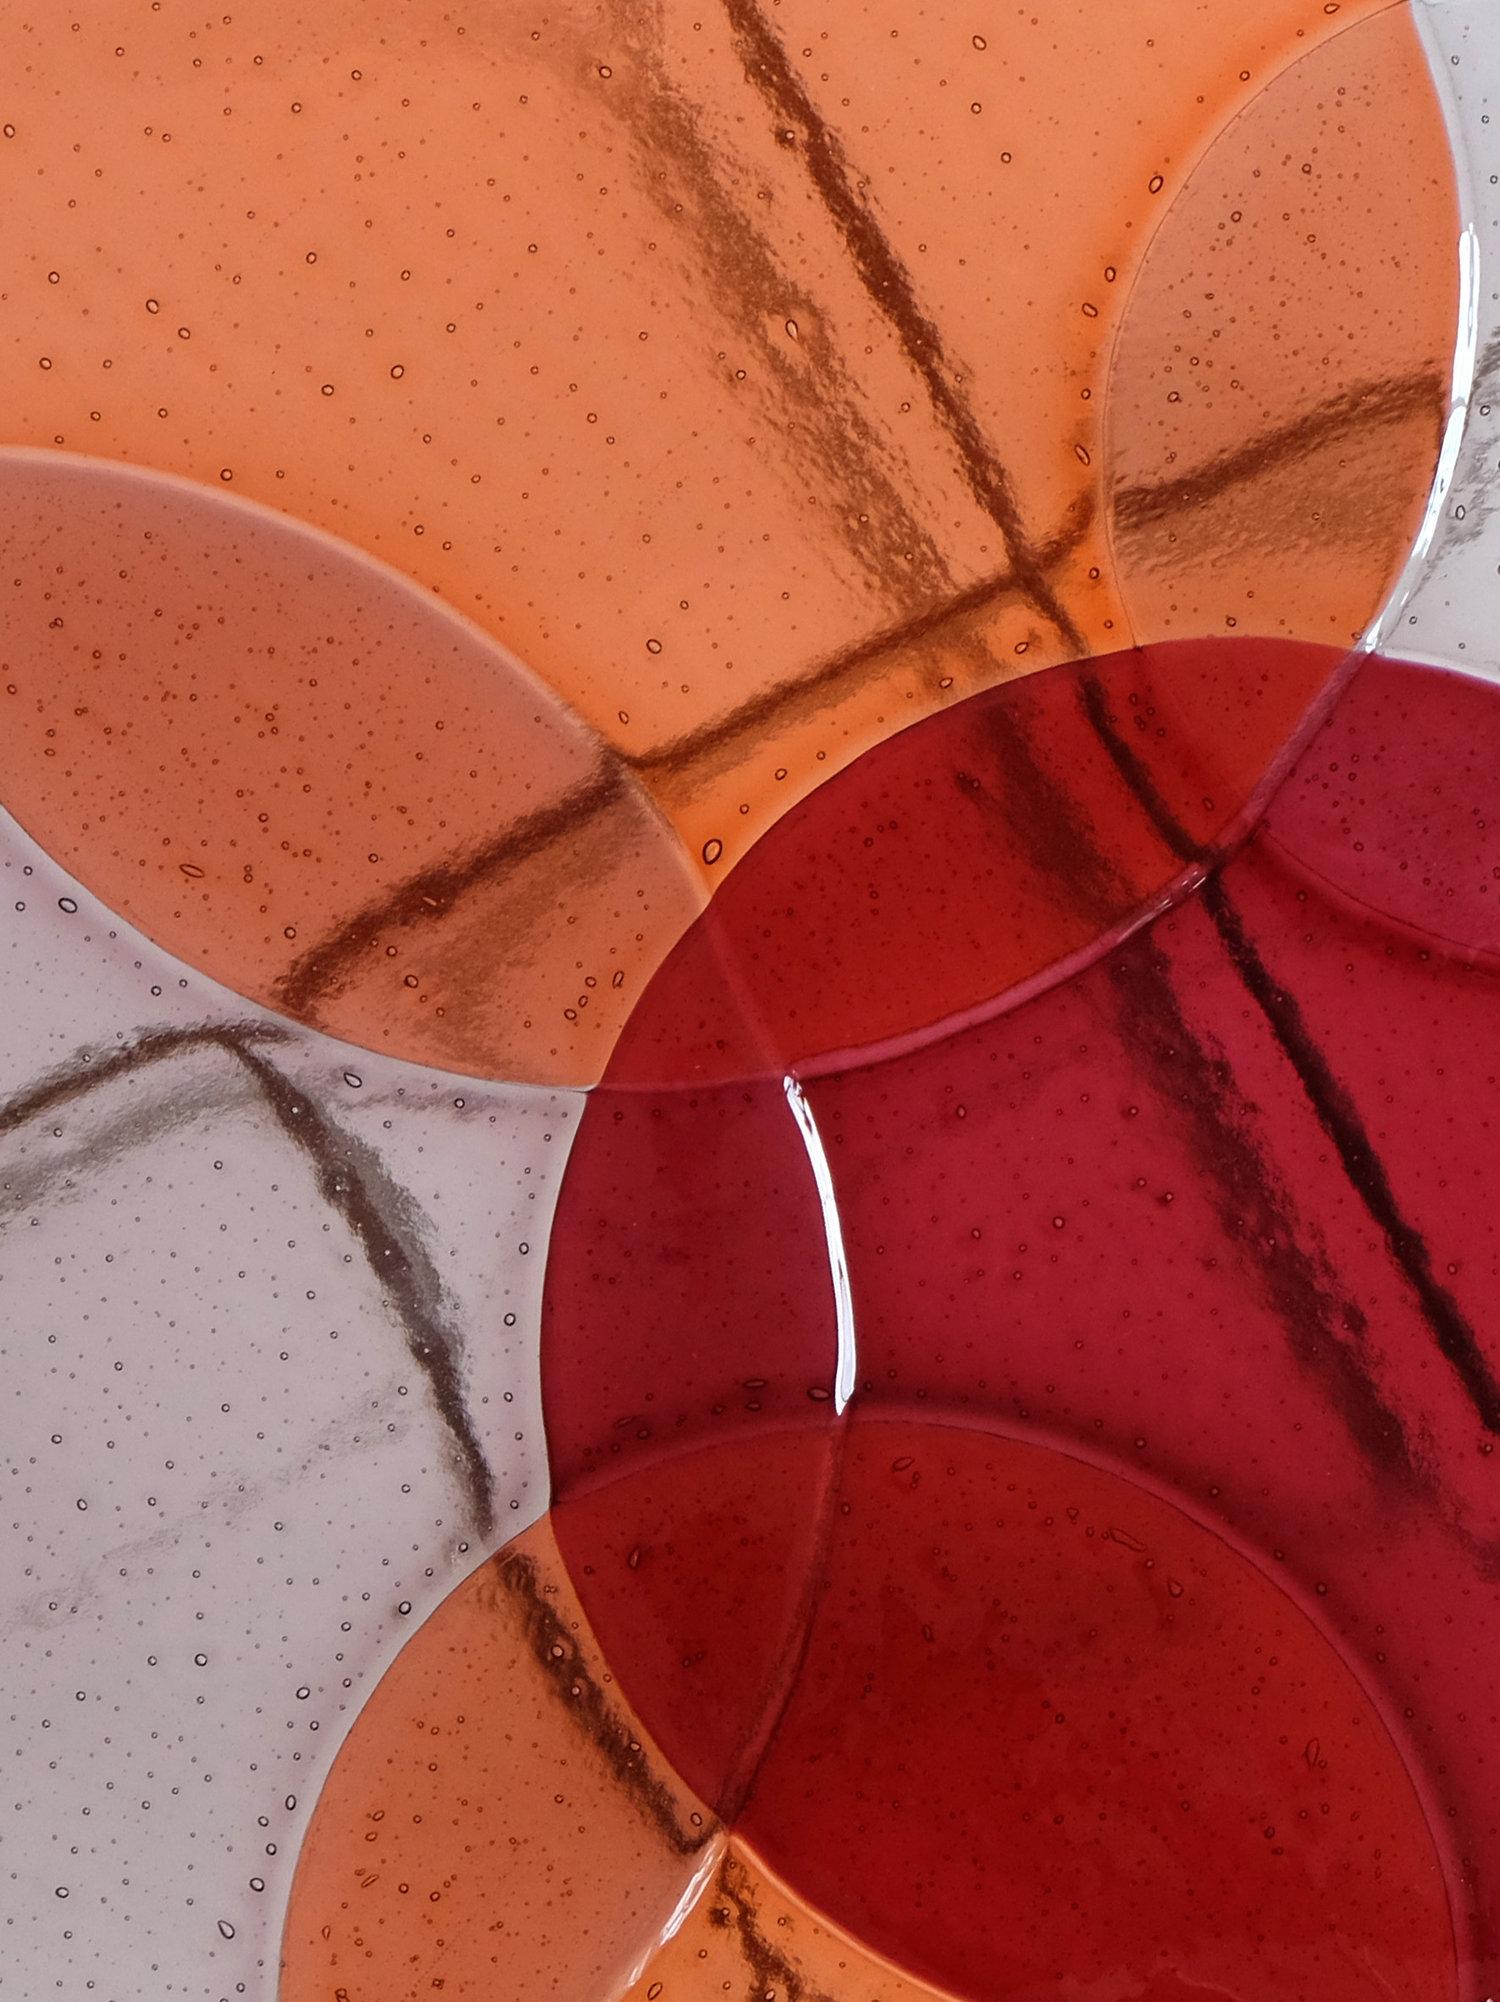 The side tables by Sebastian Herkner are suspended drops of coloured glass which found their inspiration in the particularity of the glass fusing technique. Through the process the perfectly cut glass circles are transformed: their contours get